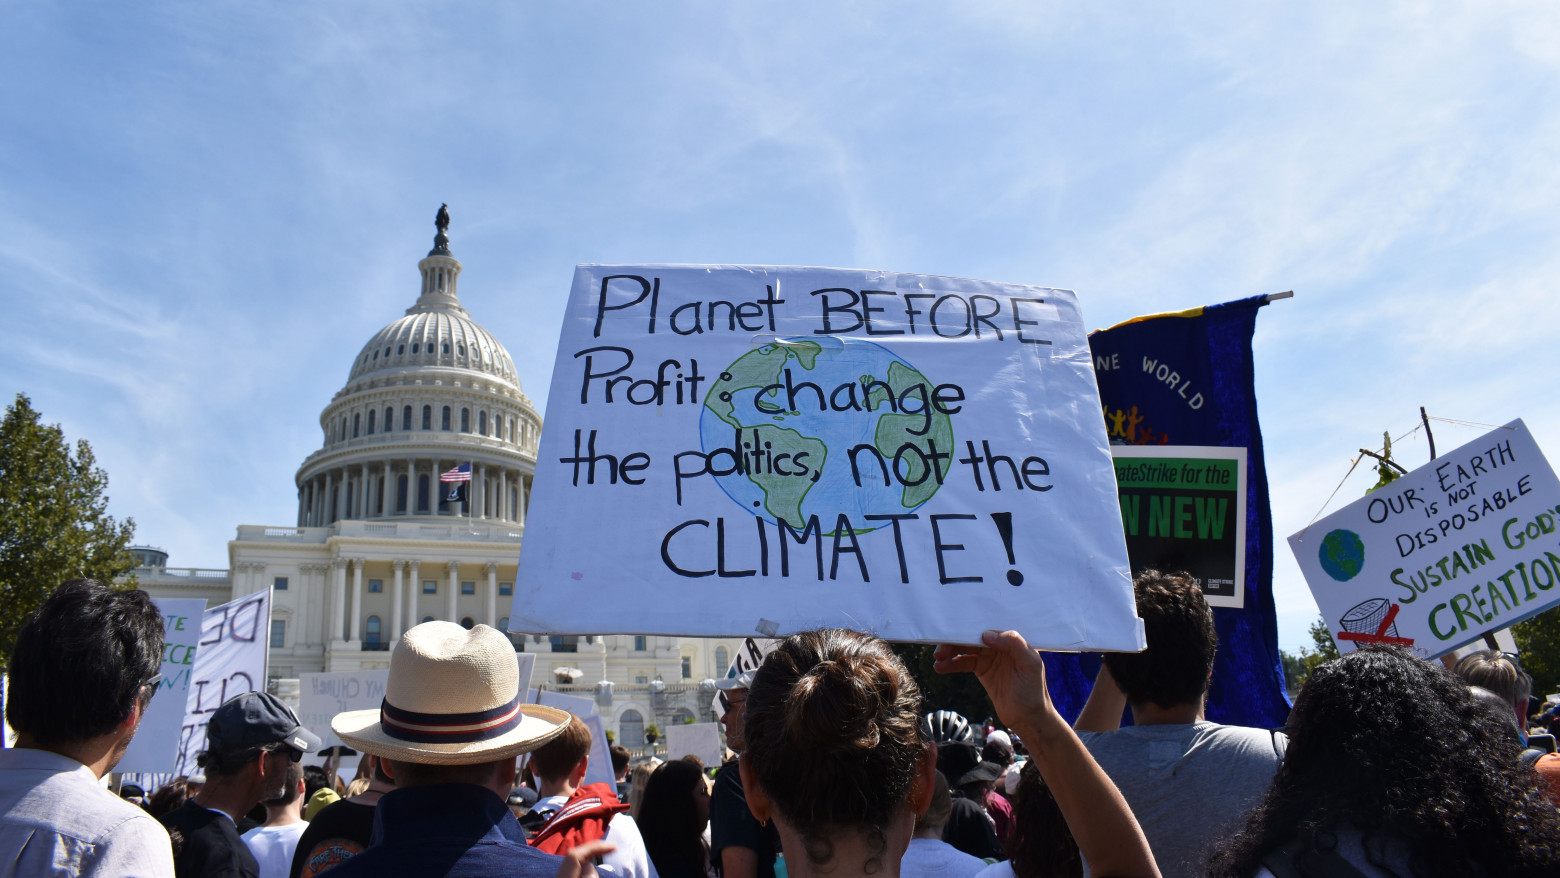 In a crowd of people in front of the Capitol building in Washington, D.C., a sign reads: "Planet BEFORE Profit: change the politics, not the CLIMATE!"